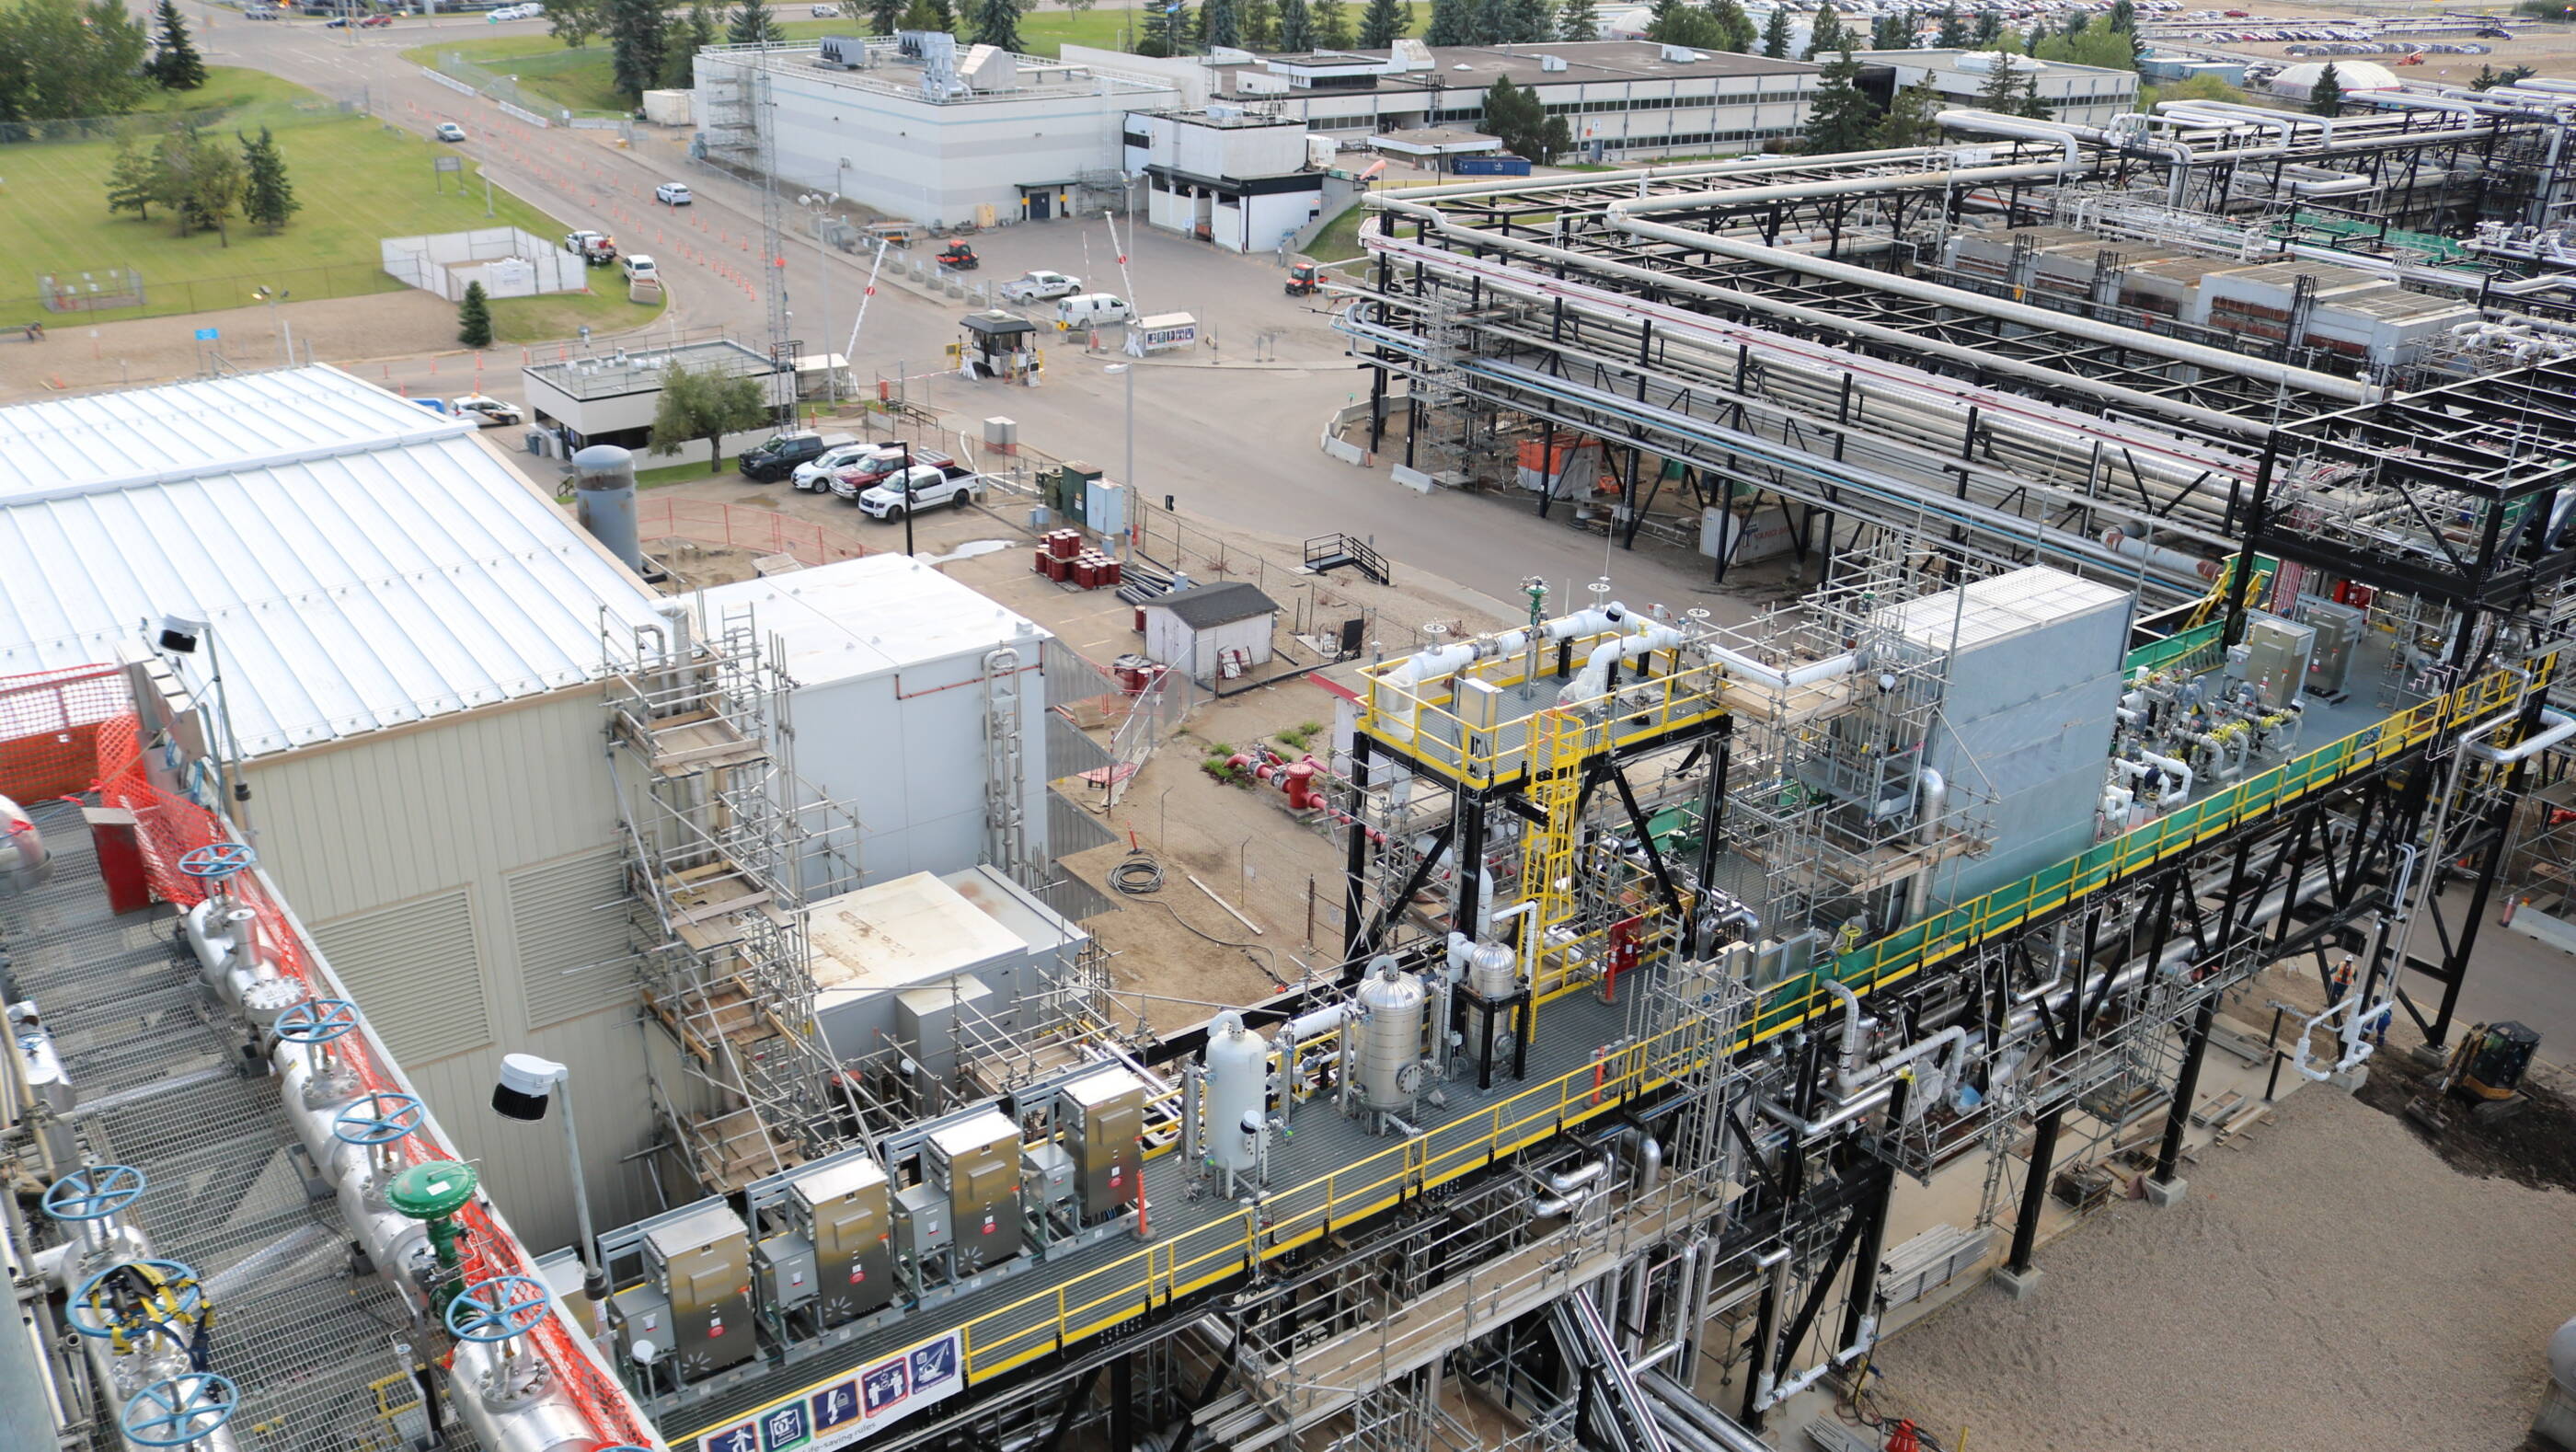 The power of cogeneration